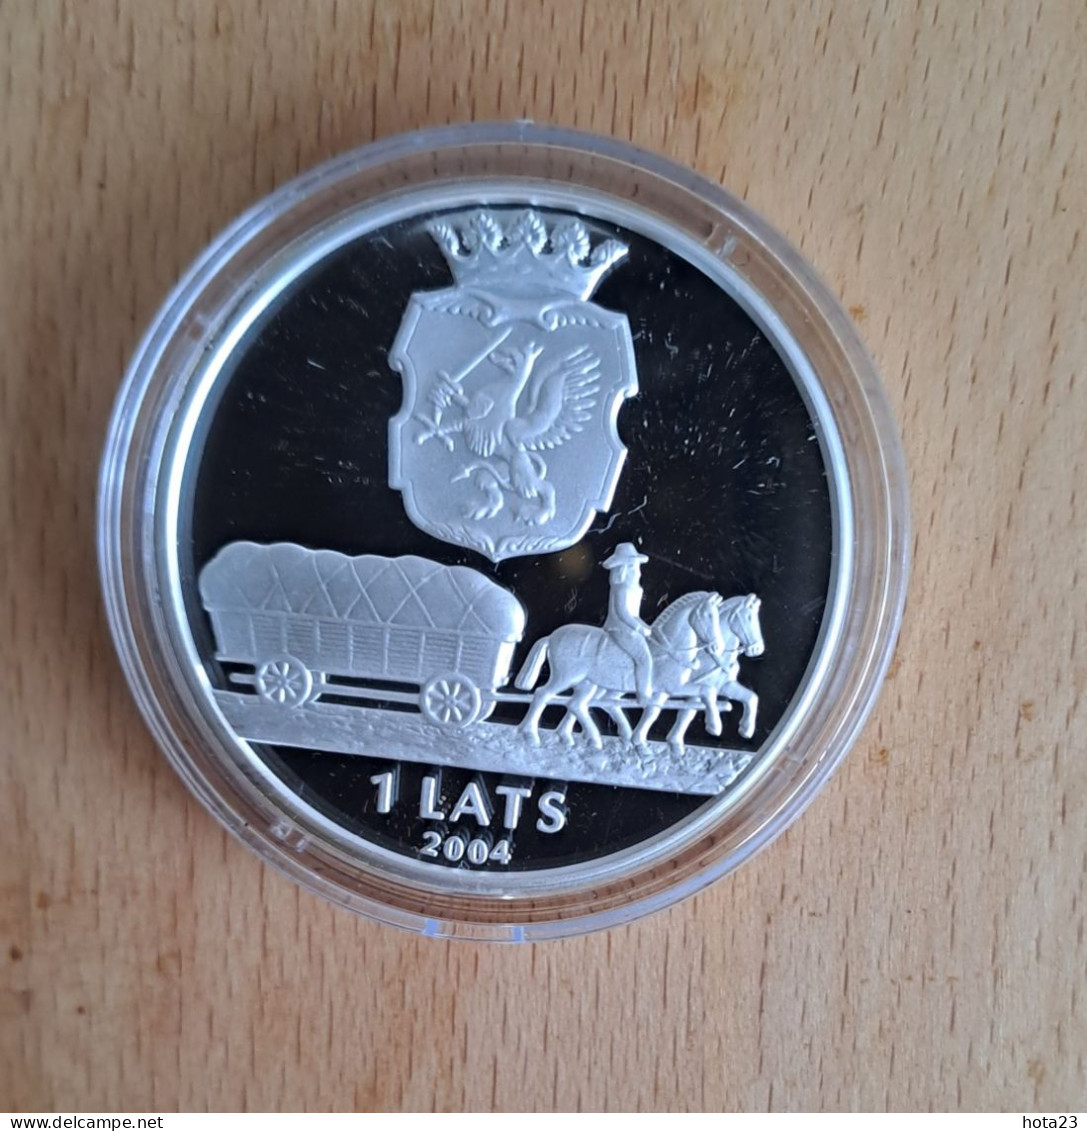 Latvia  , Lettonia , Lettland - 1 Lats Silver Coin  Vidzeme Horse Carriage ; Ploughboy   2004  Y Proof - Letonia